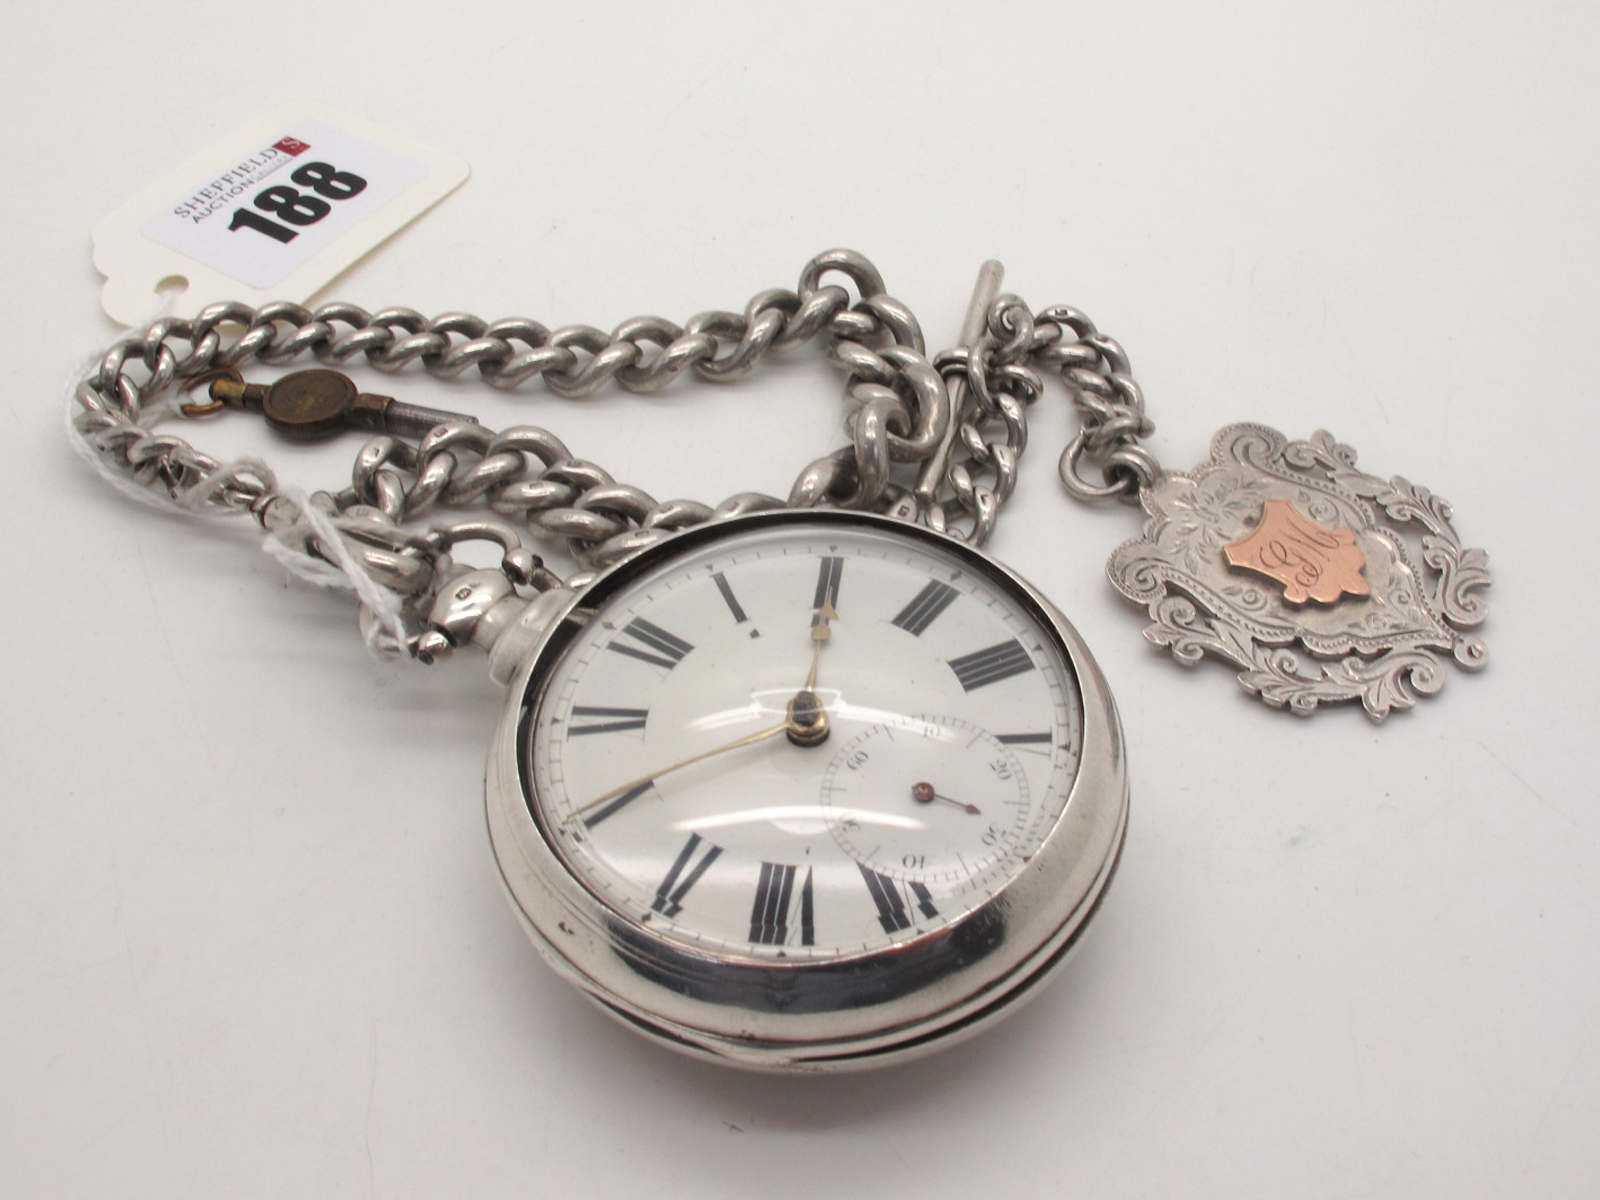 A Georgian Hallmarked Silver Cased Pair Case Pocketwatch, rge white dial with black Roman numerals